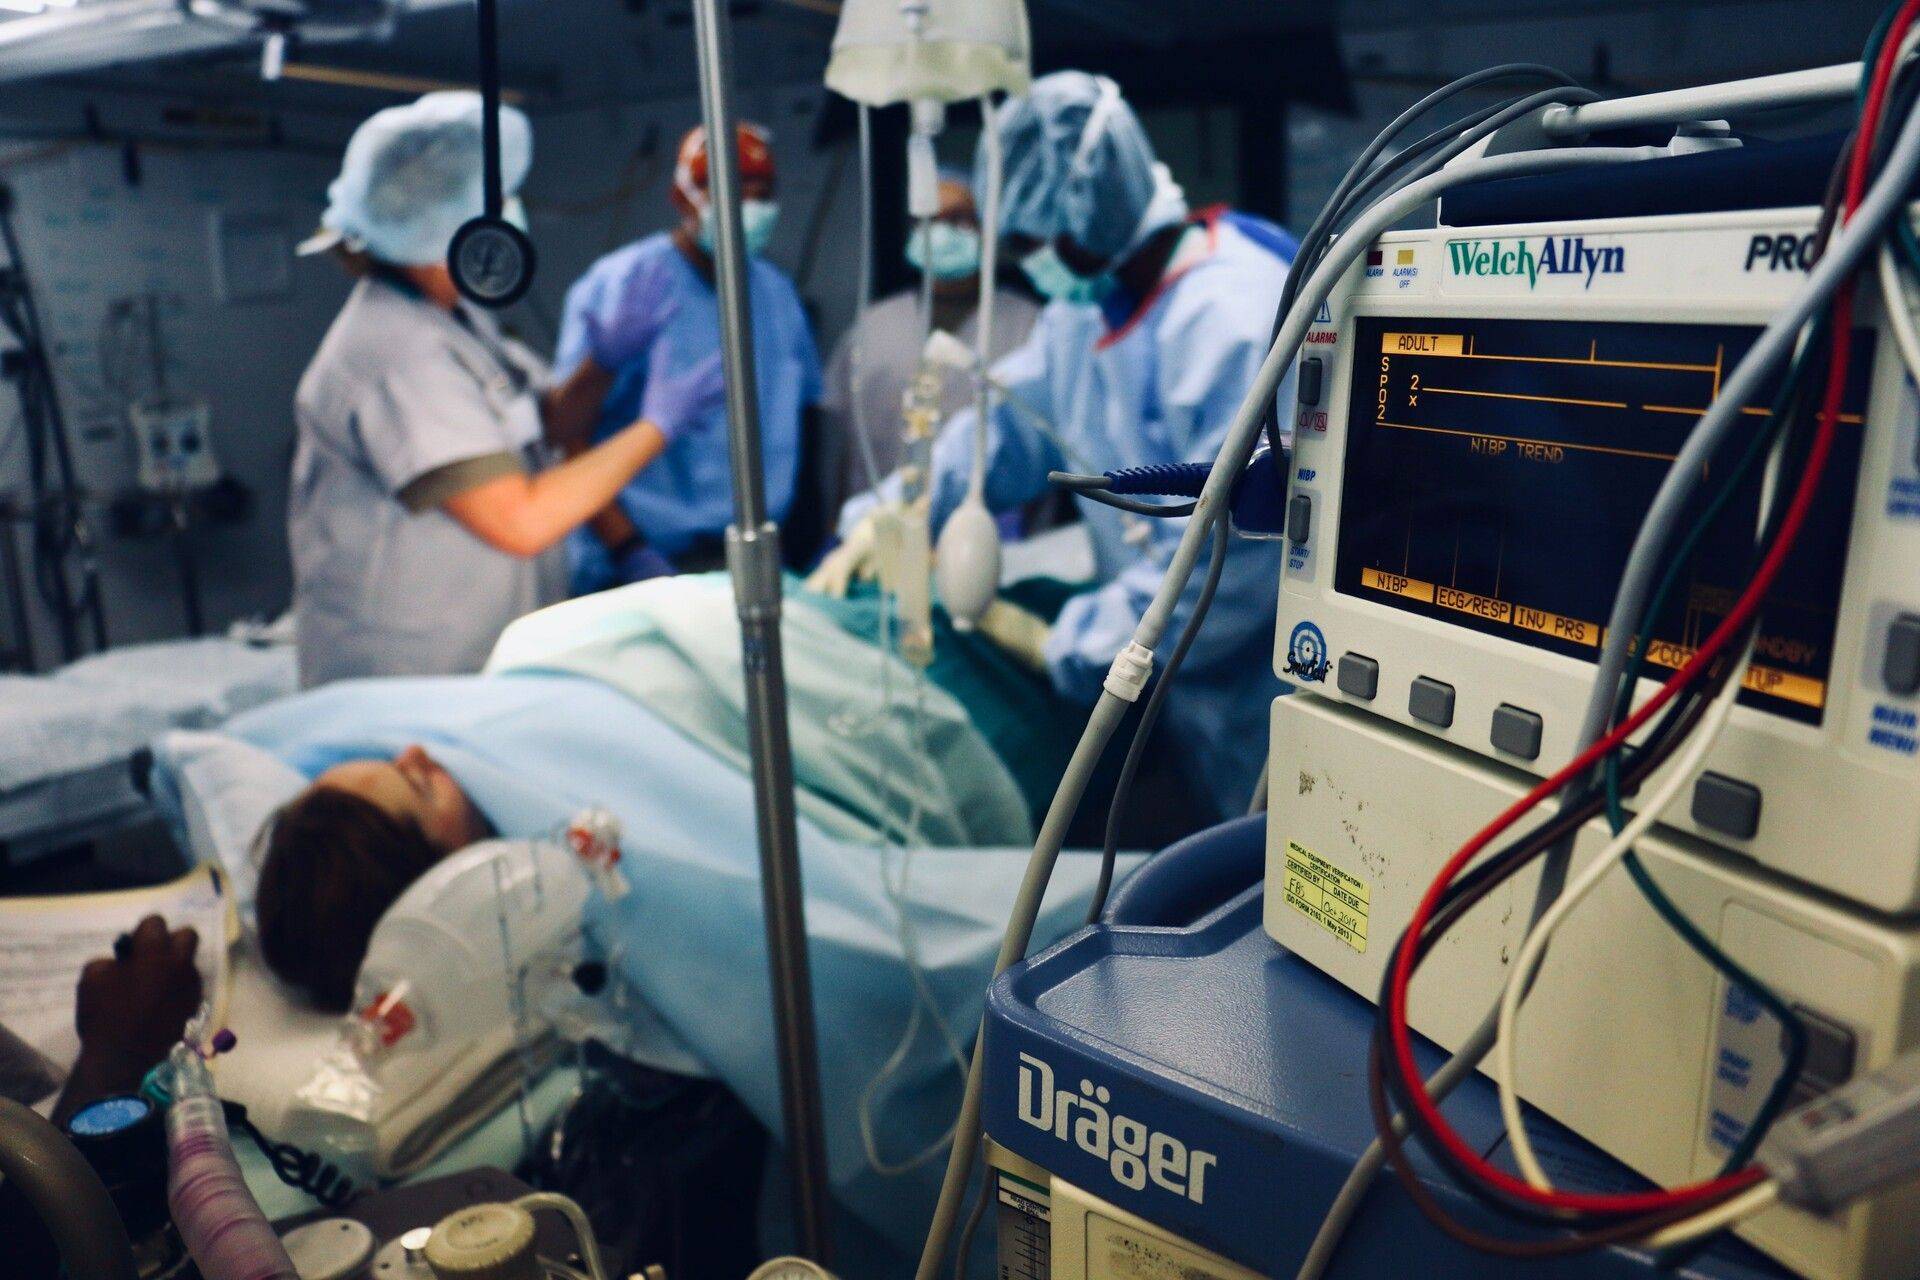 ICU patient receiving care from medical staff